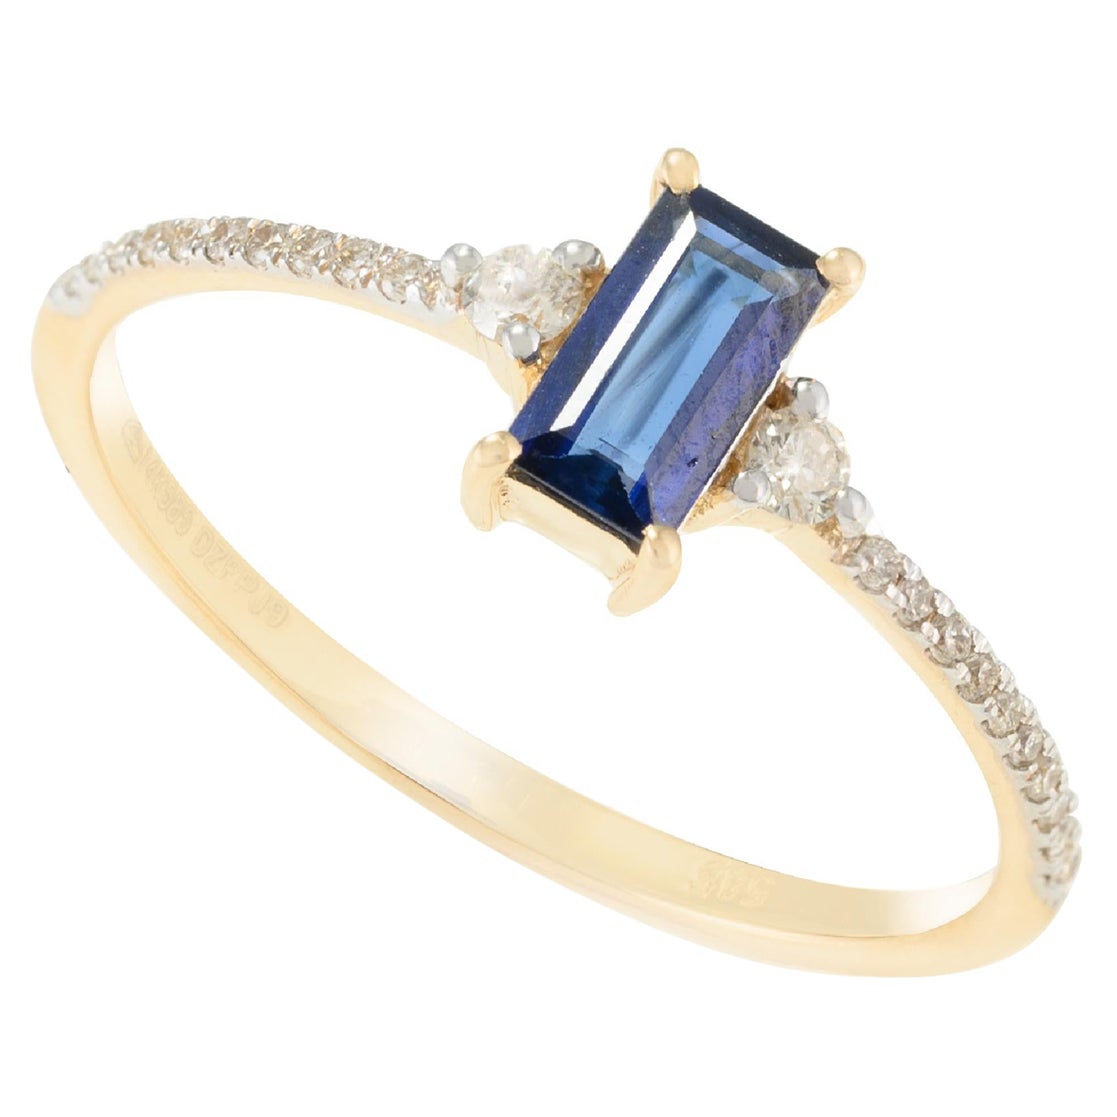 Baguette Blue Sapphire Diamond Everyday Ring in 14k Solid Yellow Gold